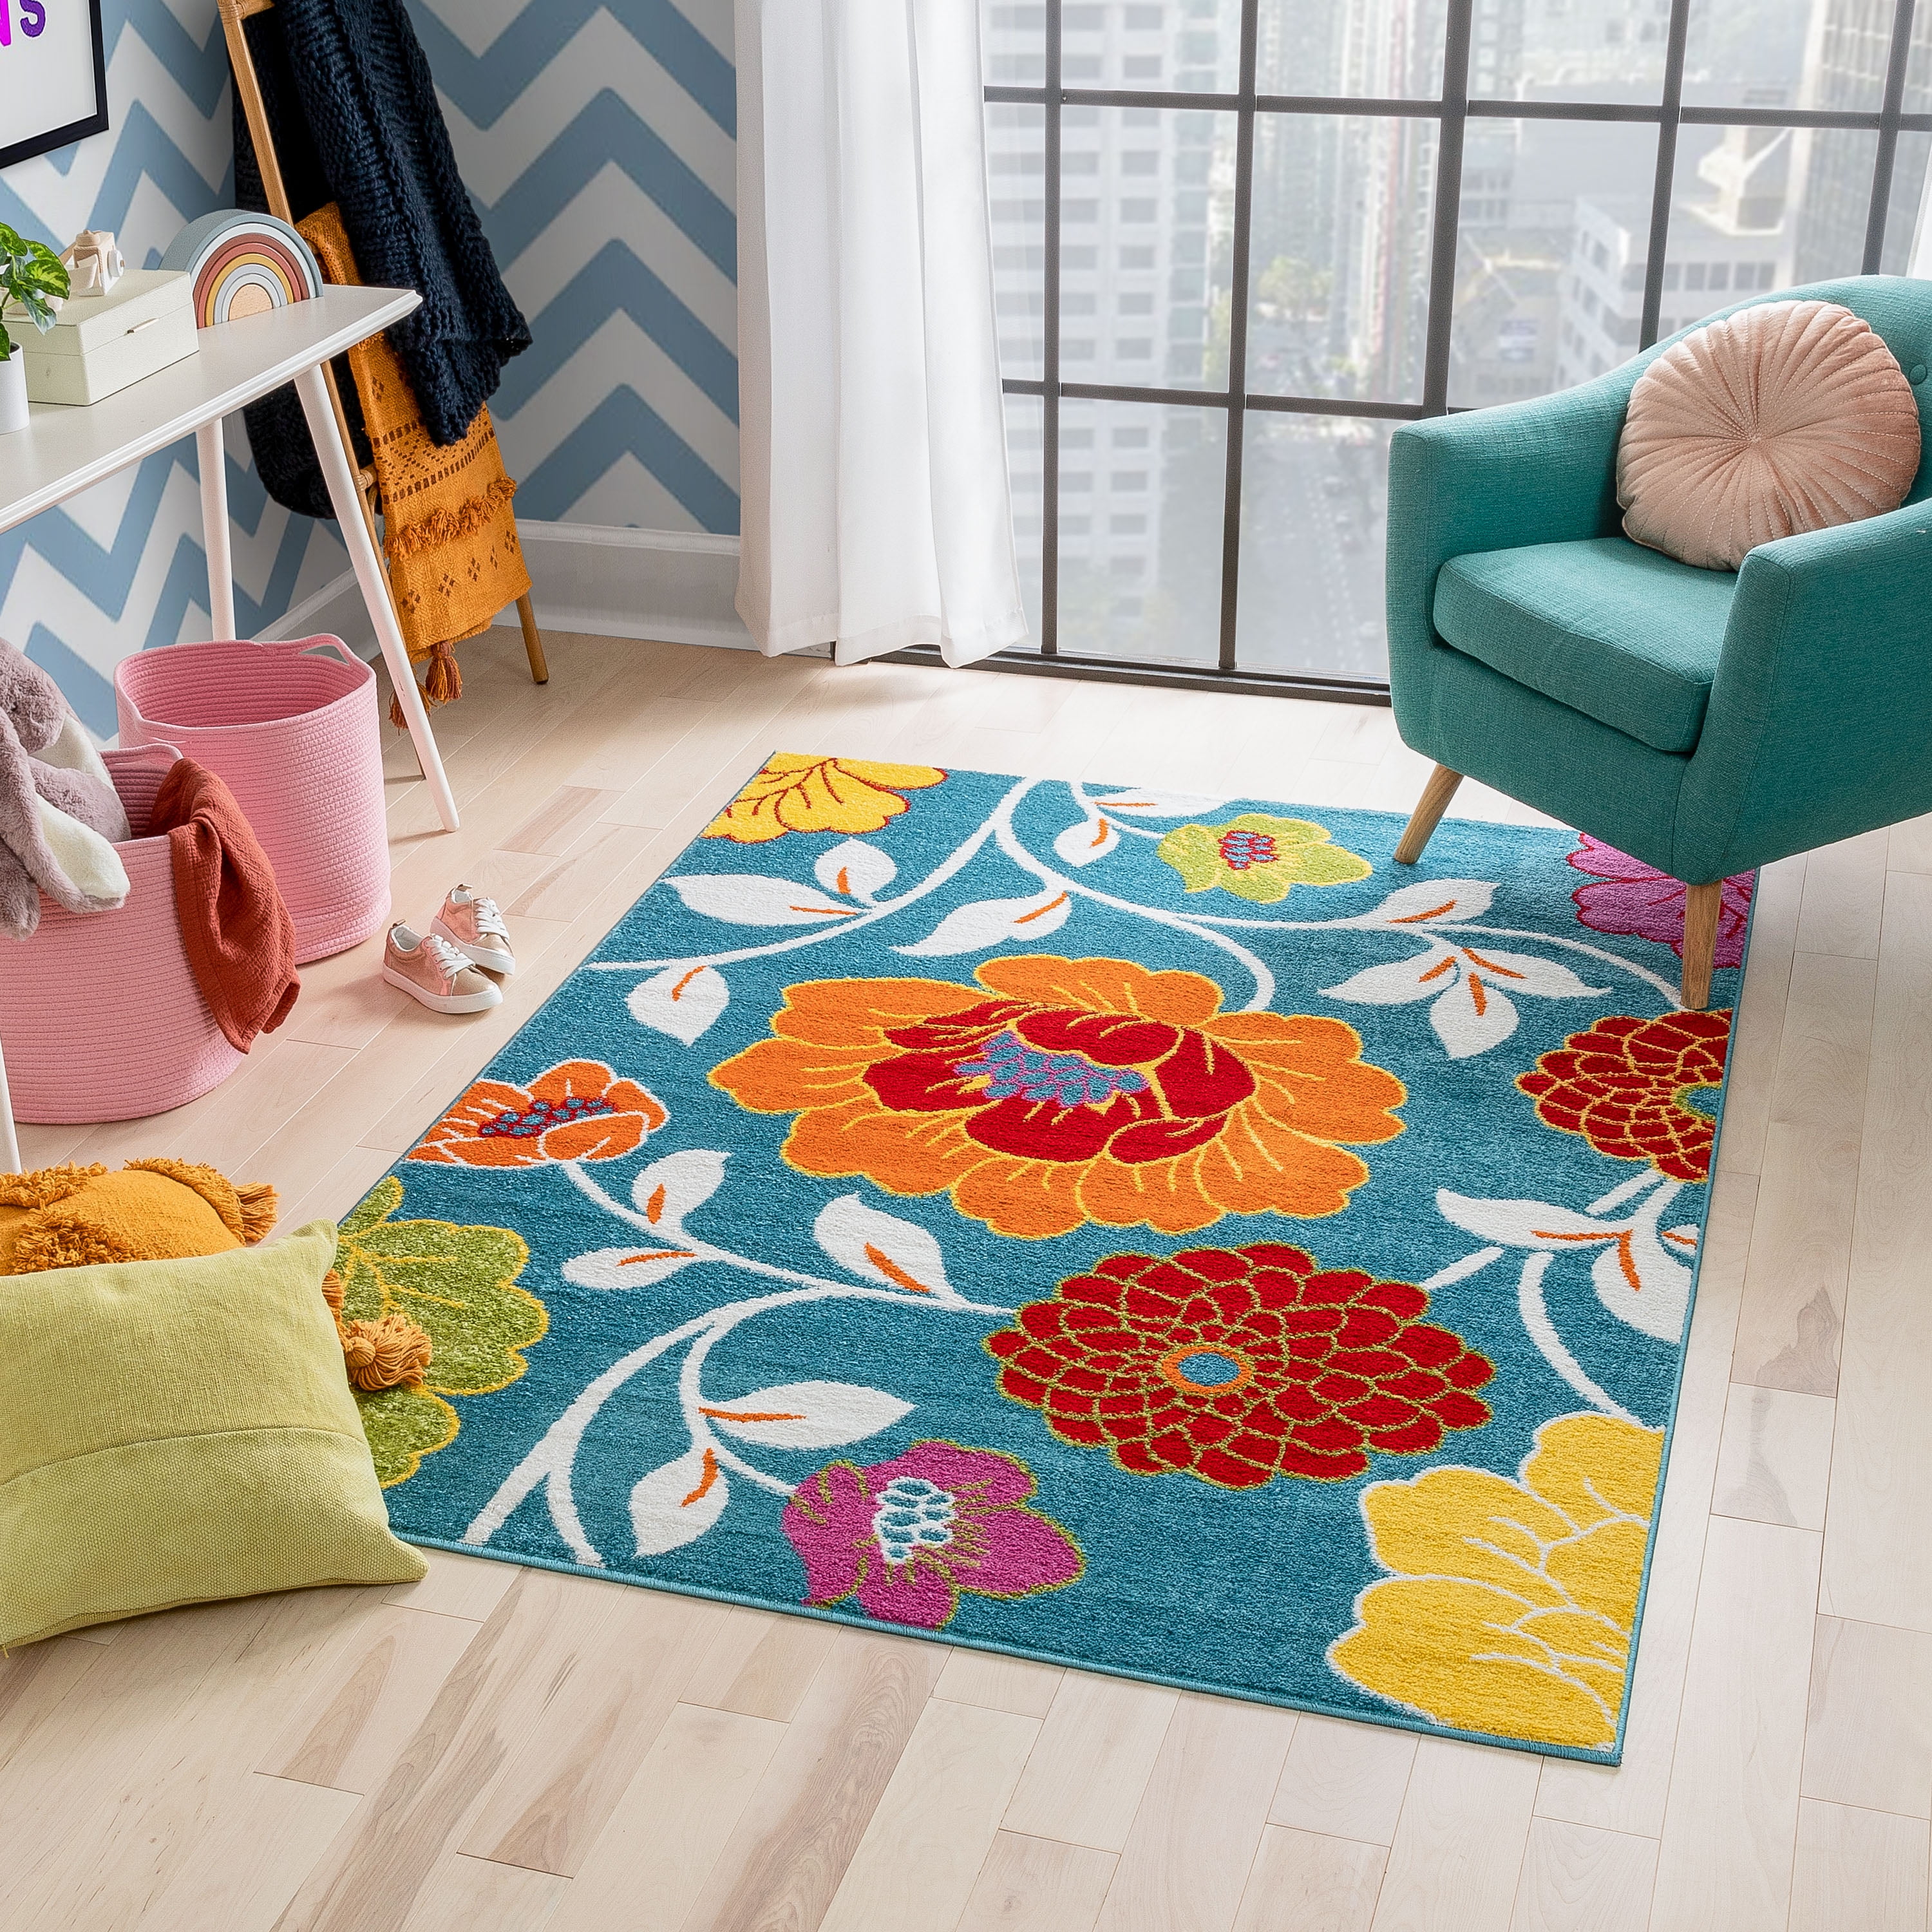 RUGS AREA RUGS CARPET AREA RUG FLOOR LARGE MODERN COLORFUL FLORAL COOL 5x7 RUGS 